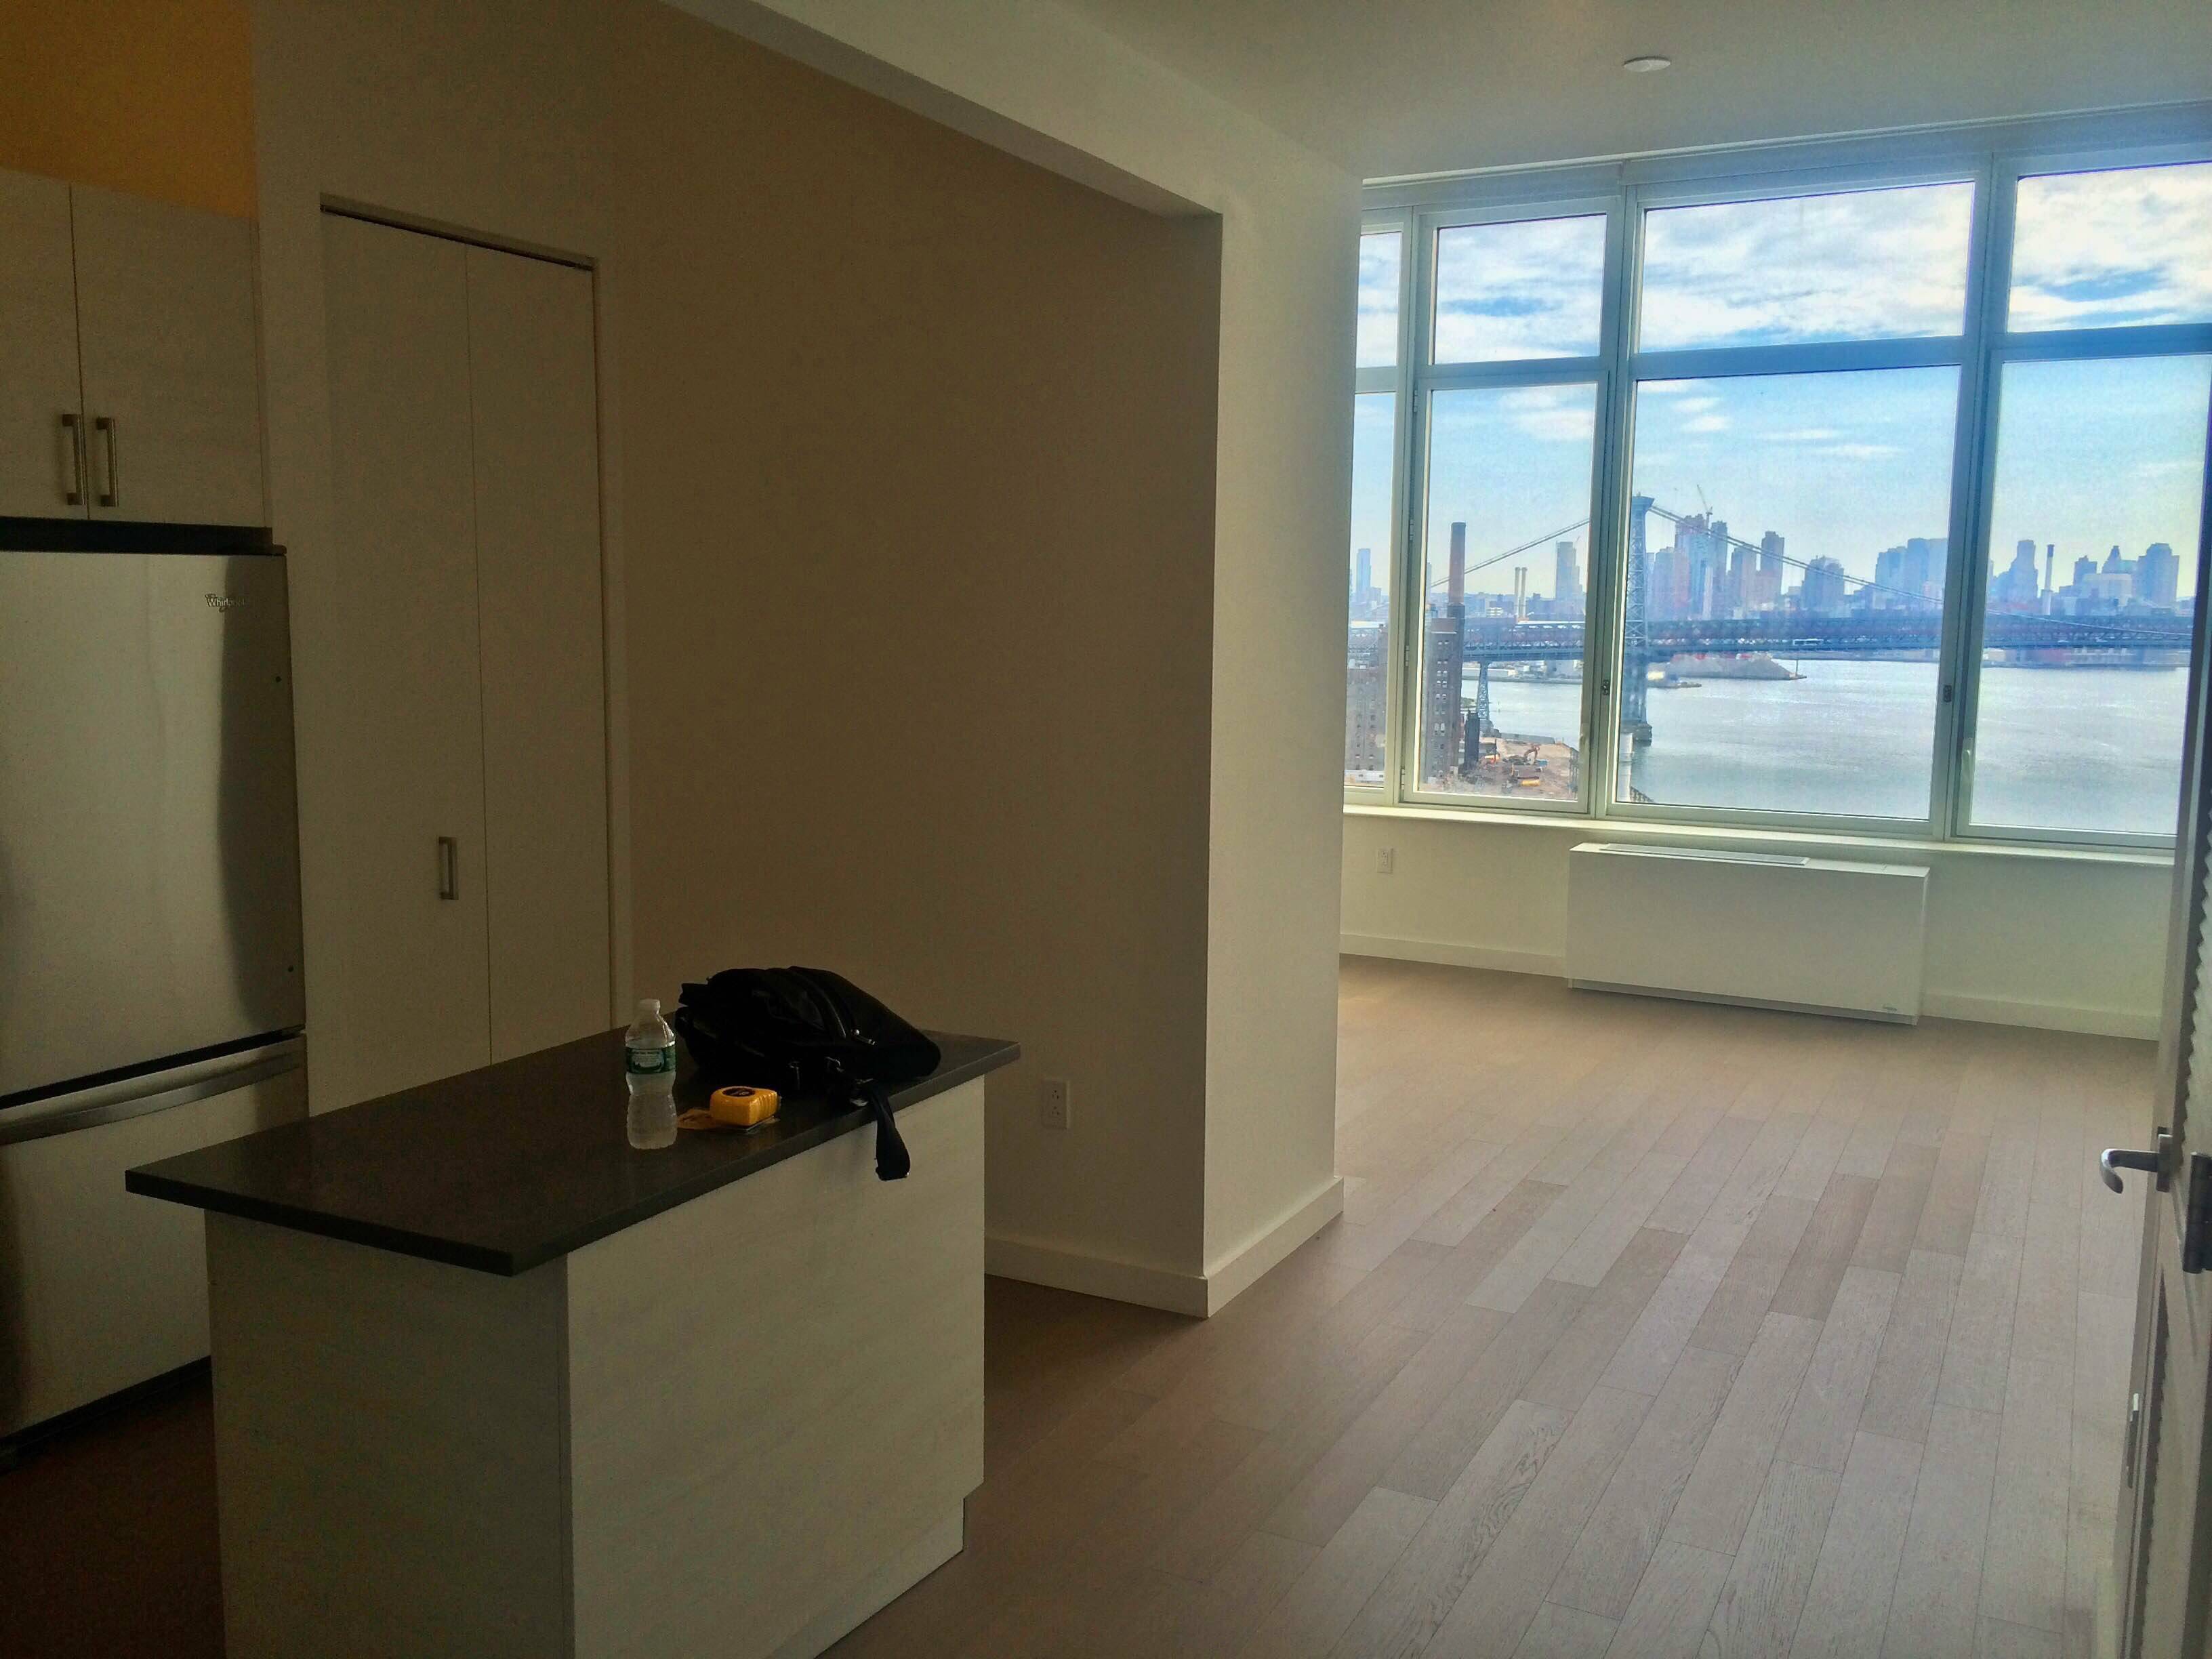 NO FEE, 1 MONTH FREE, BRAND NEW ALCOVE STUDIO, 13 ft CEILINGS, AMAZING DIRECT CITY & WATER VIEWS, SPACIOUS ISLAND KITCHEN, POOL, FITNESS CENTER, HUGE INDOOR & OUTDOOR LOUNGE, 24hr DOORMAN, CLOSE TO FERRY